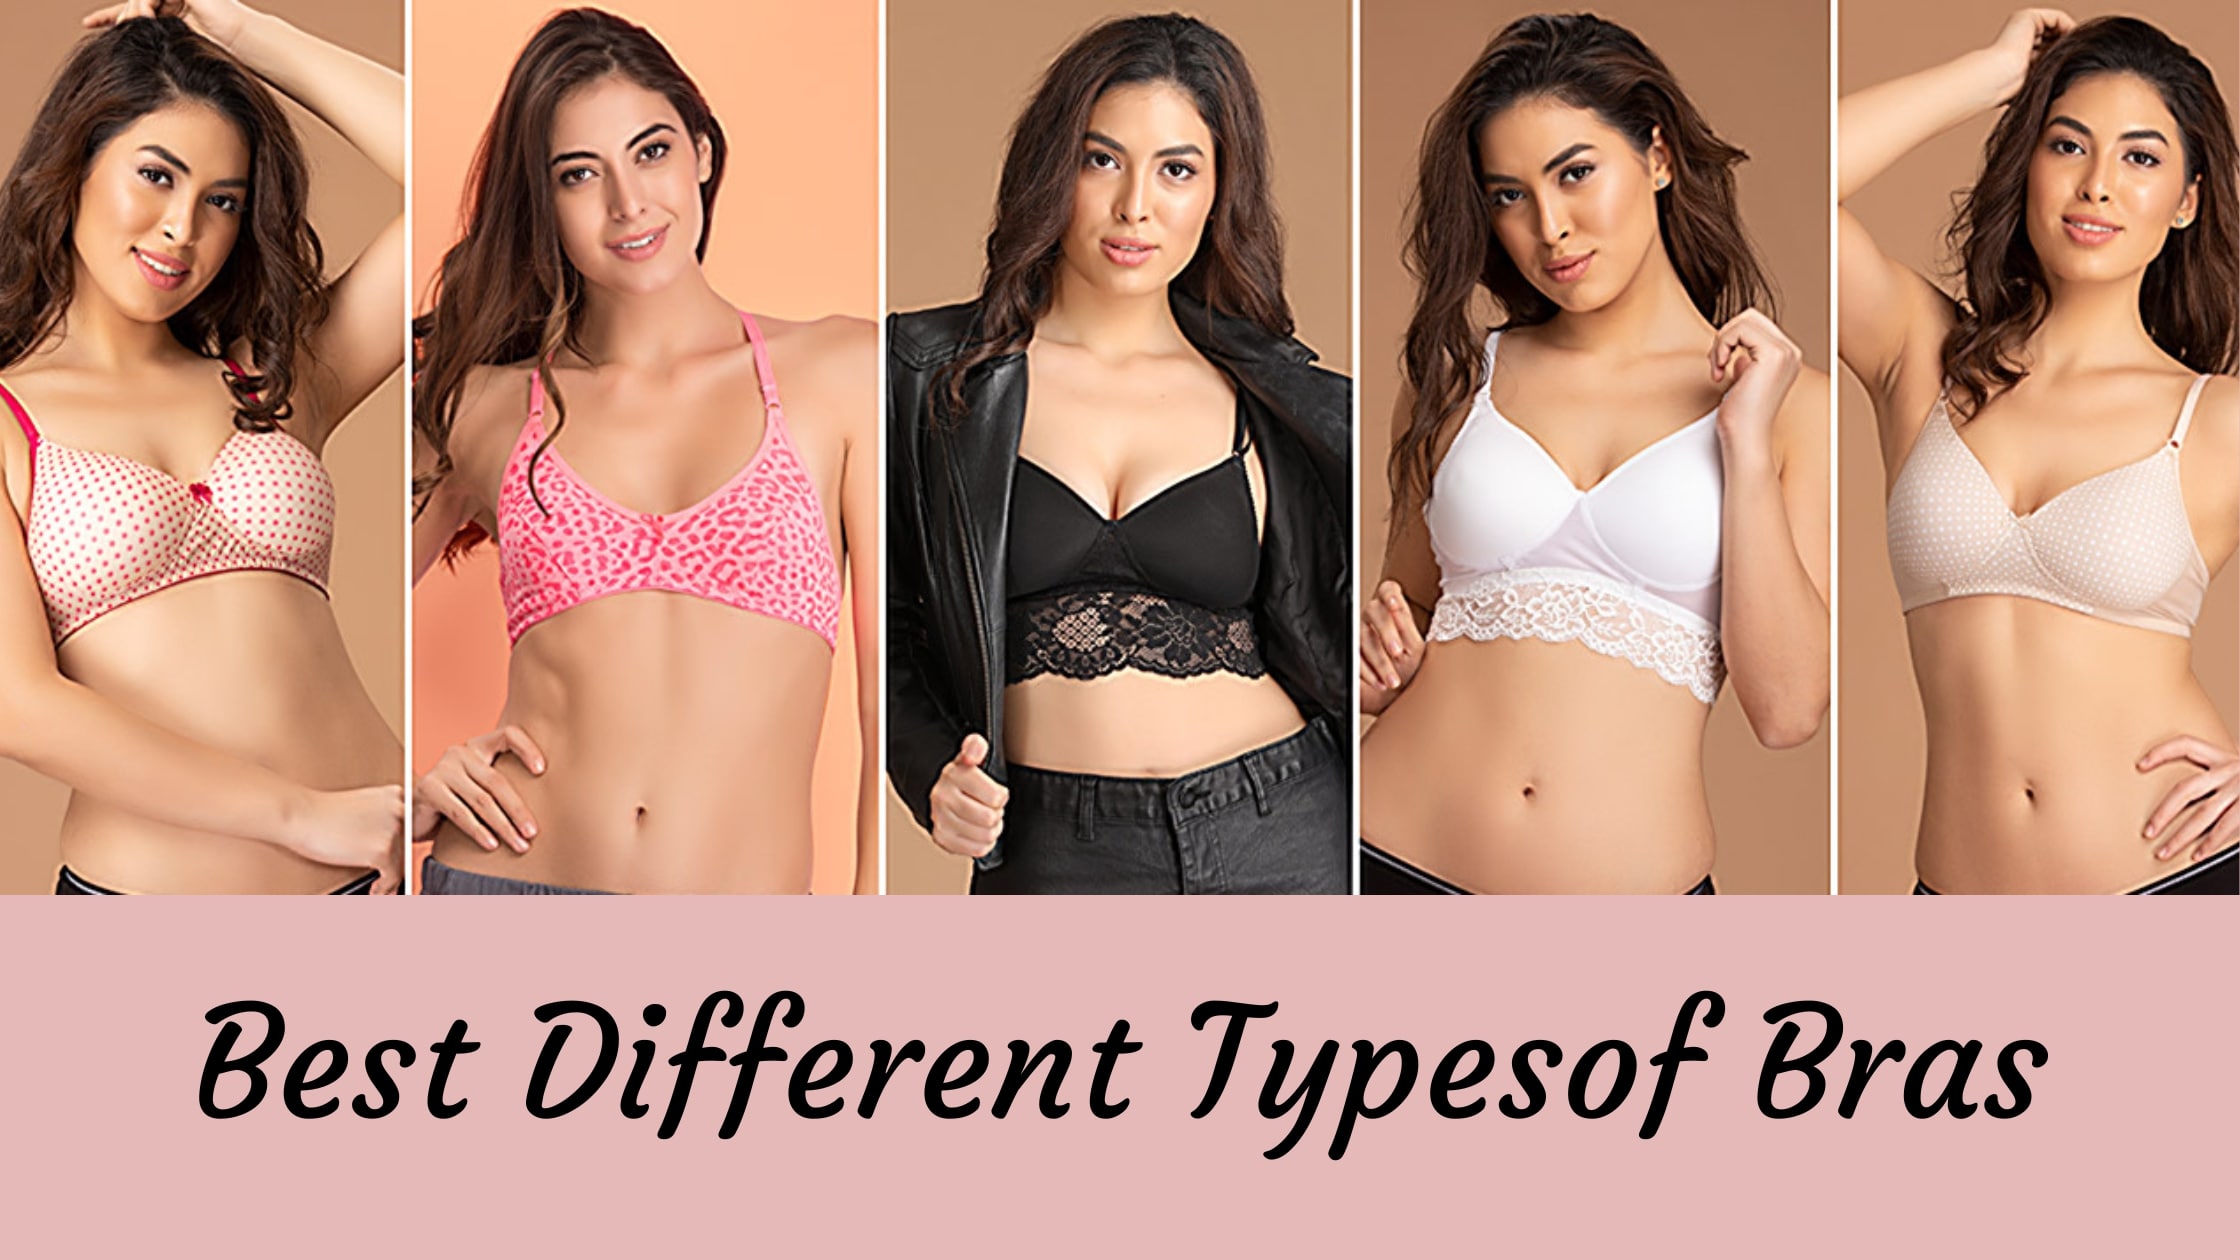 Best Different Types of Bras for 2022